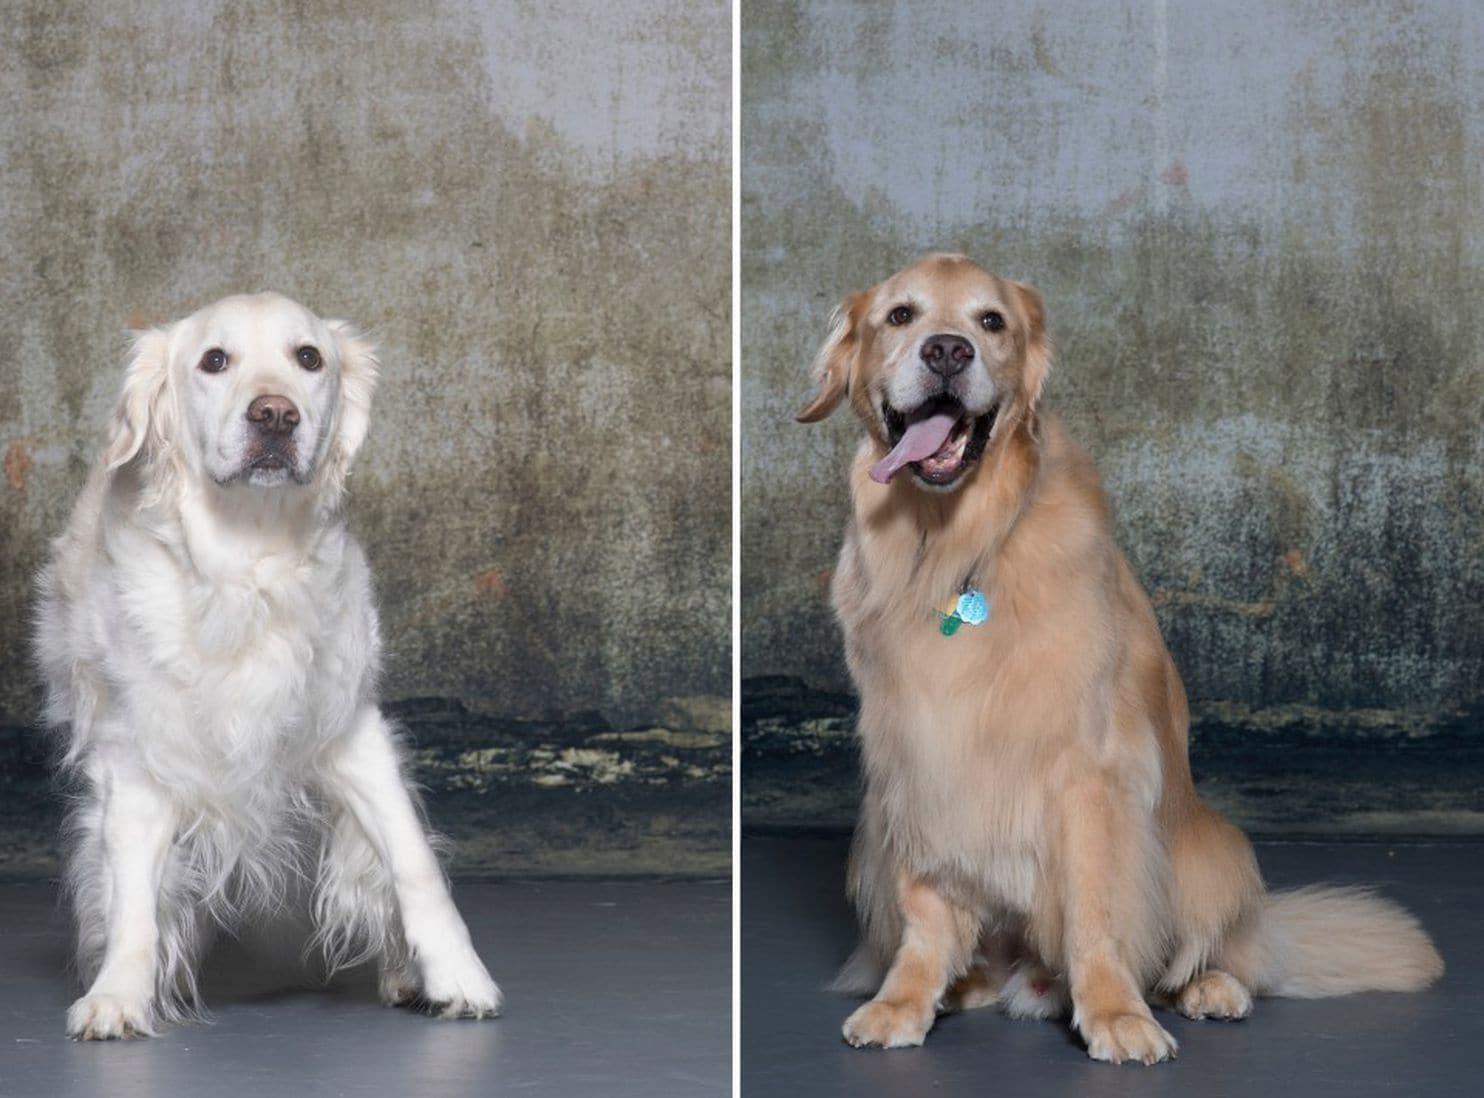 How 3,000 very good golden retrievers could help all dogs ...